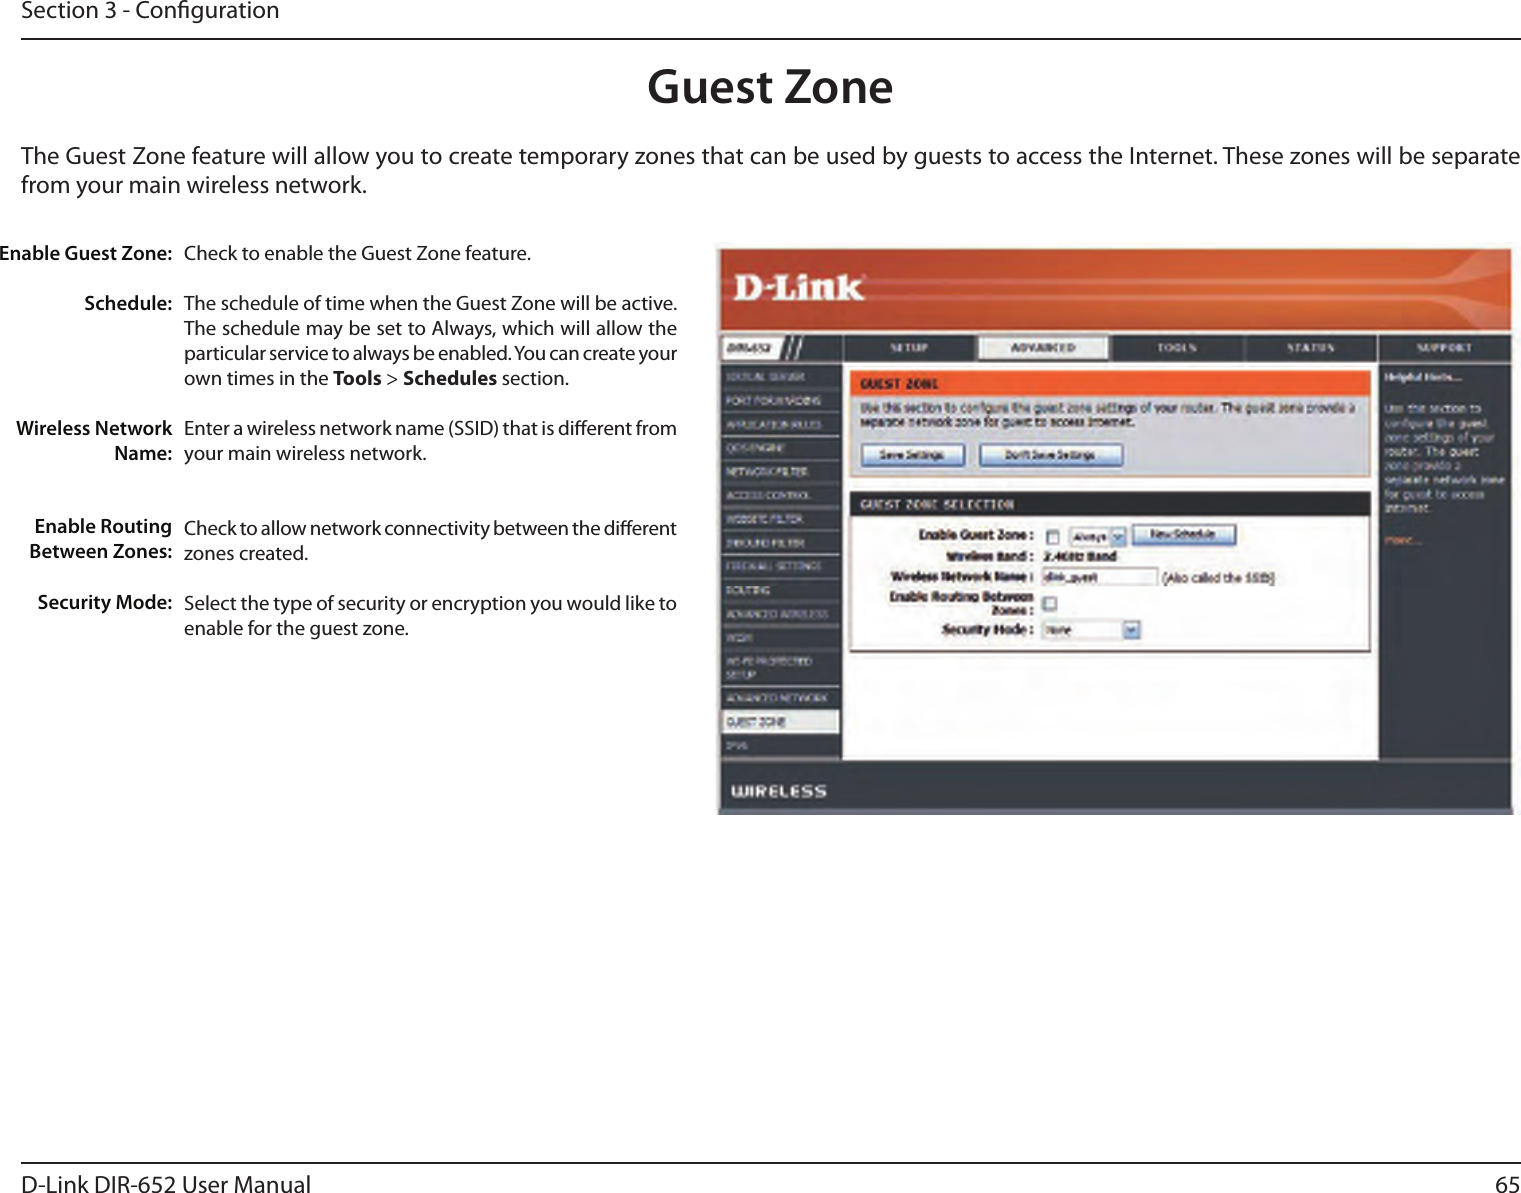 65D-Link DIR-652 User ManualSection 3 - CongurationGuest ZoneCheck to enable the Guest Zone feature. The schedule of time when the Guest Zone will be active. The schedule may be set to Always, which will allow the particular service to always be enabled. You can create your own times in the Tools &gt; Schedules section.Enter a wireless network name (SSID) that is dierent from your main wireless network.Check to allow network connectivity between the dierent zones created. Select the type of security or encryption you would like to enable for the guest zone.  Enable Guest Zone:Schedule:Wireless Network Name:Enable Routing Between Zones:Security Mode:The Guest Zone feature will allow you to create temporary zones that can be used by guests to access the Internet. These zones will be separate from your main wireless network. 